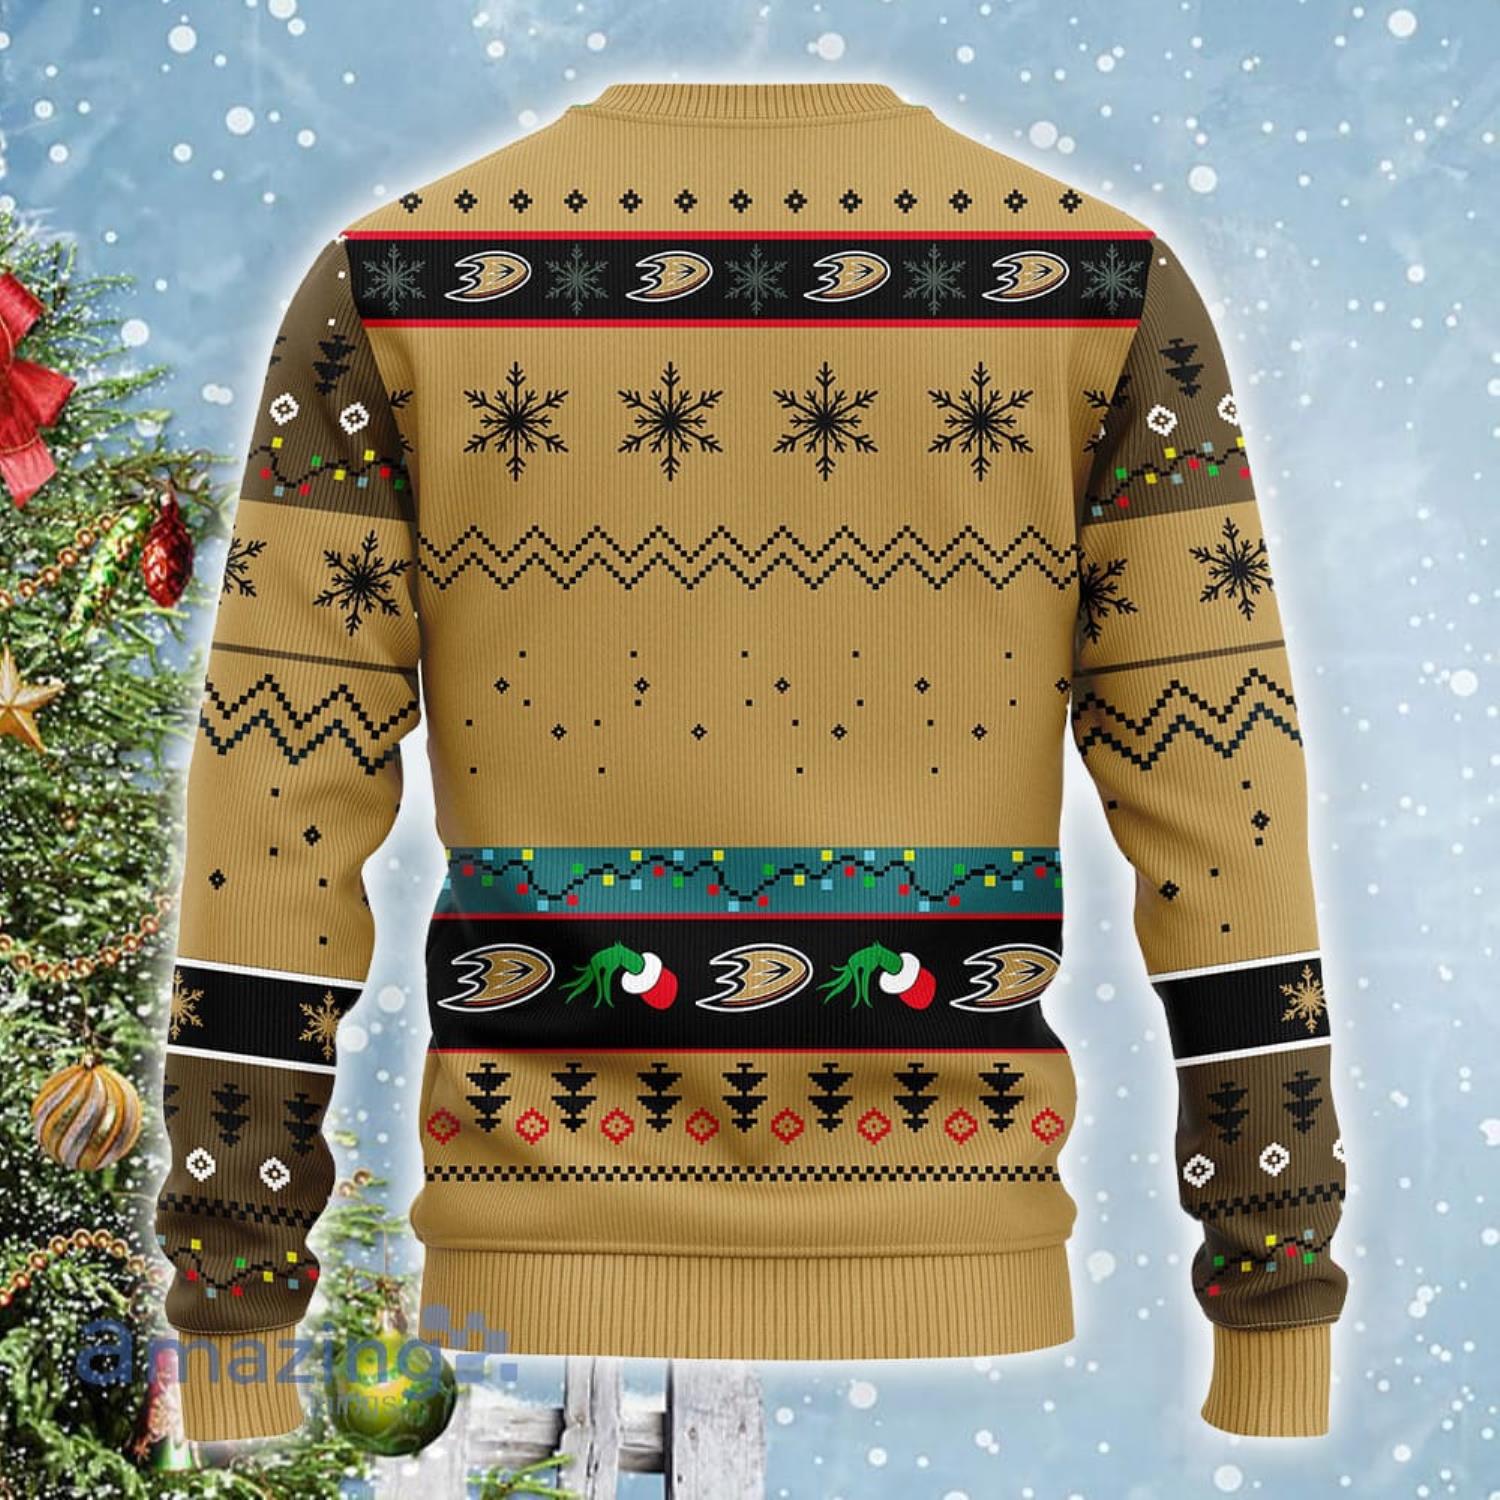 Nhl Anaheim Ducks Christmas Ugly Sweater Print Funny Grinch Gift For Hockey  Fans - Shibtee Clothing